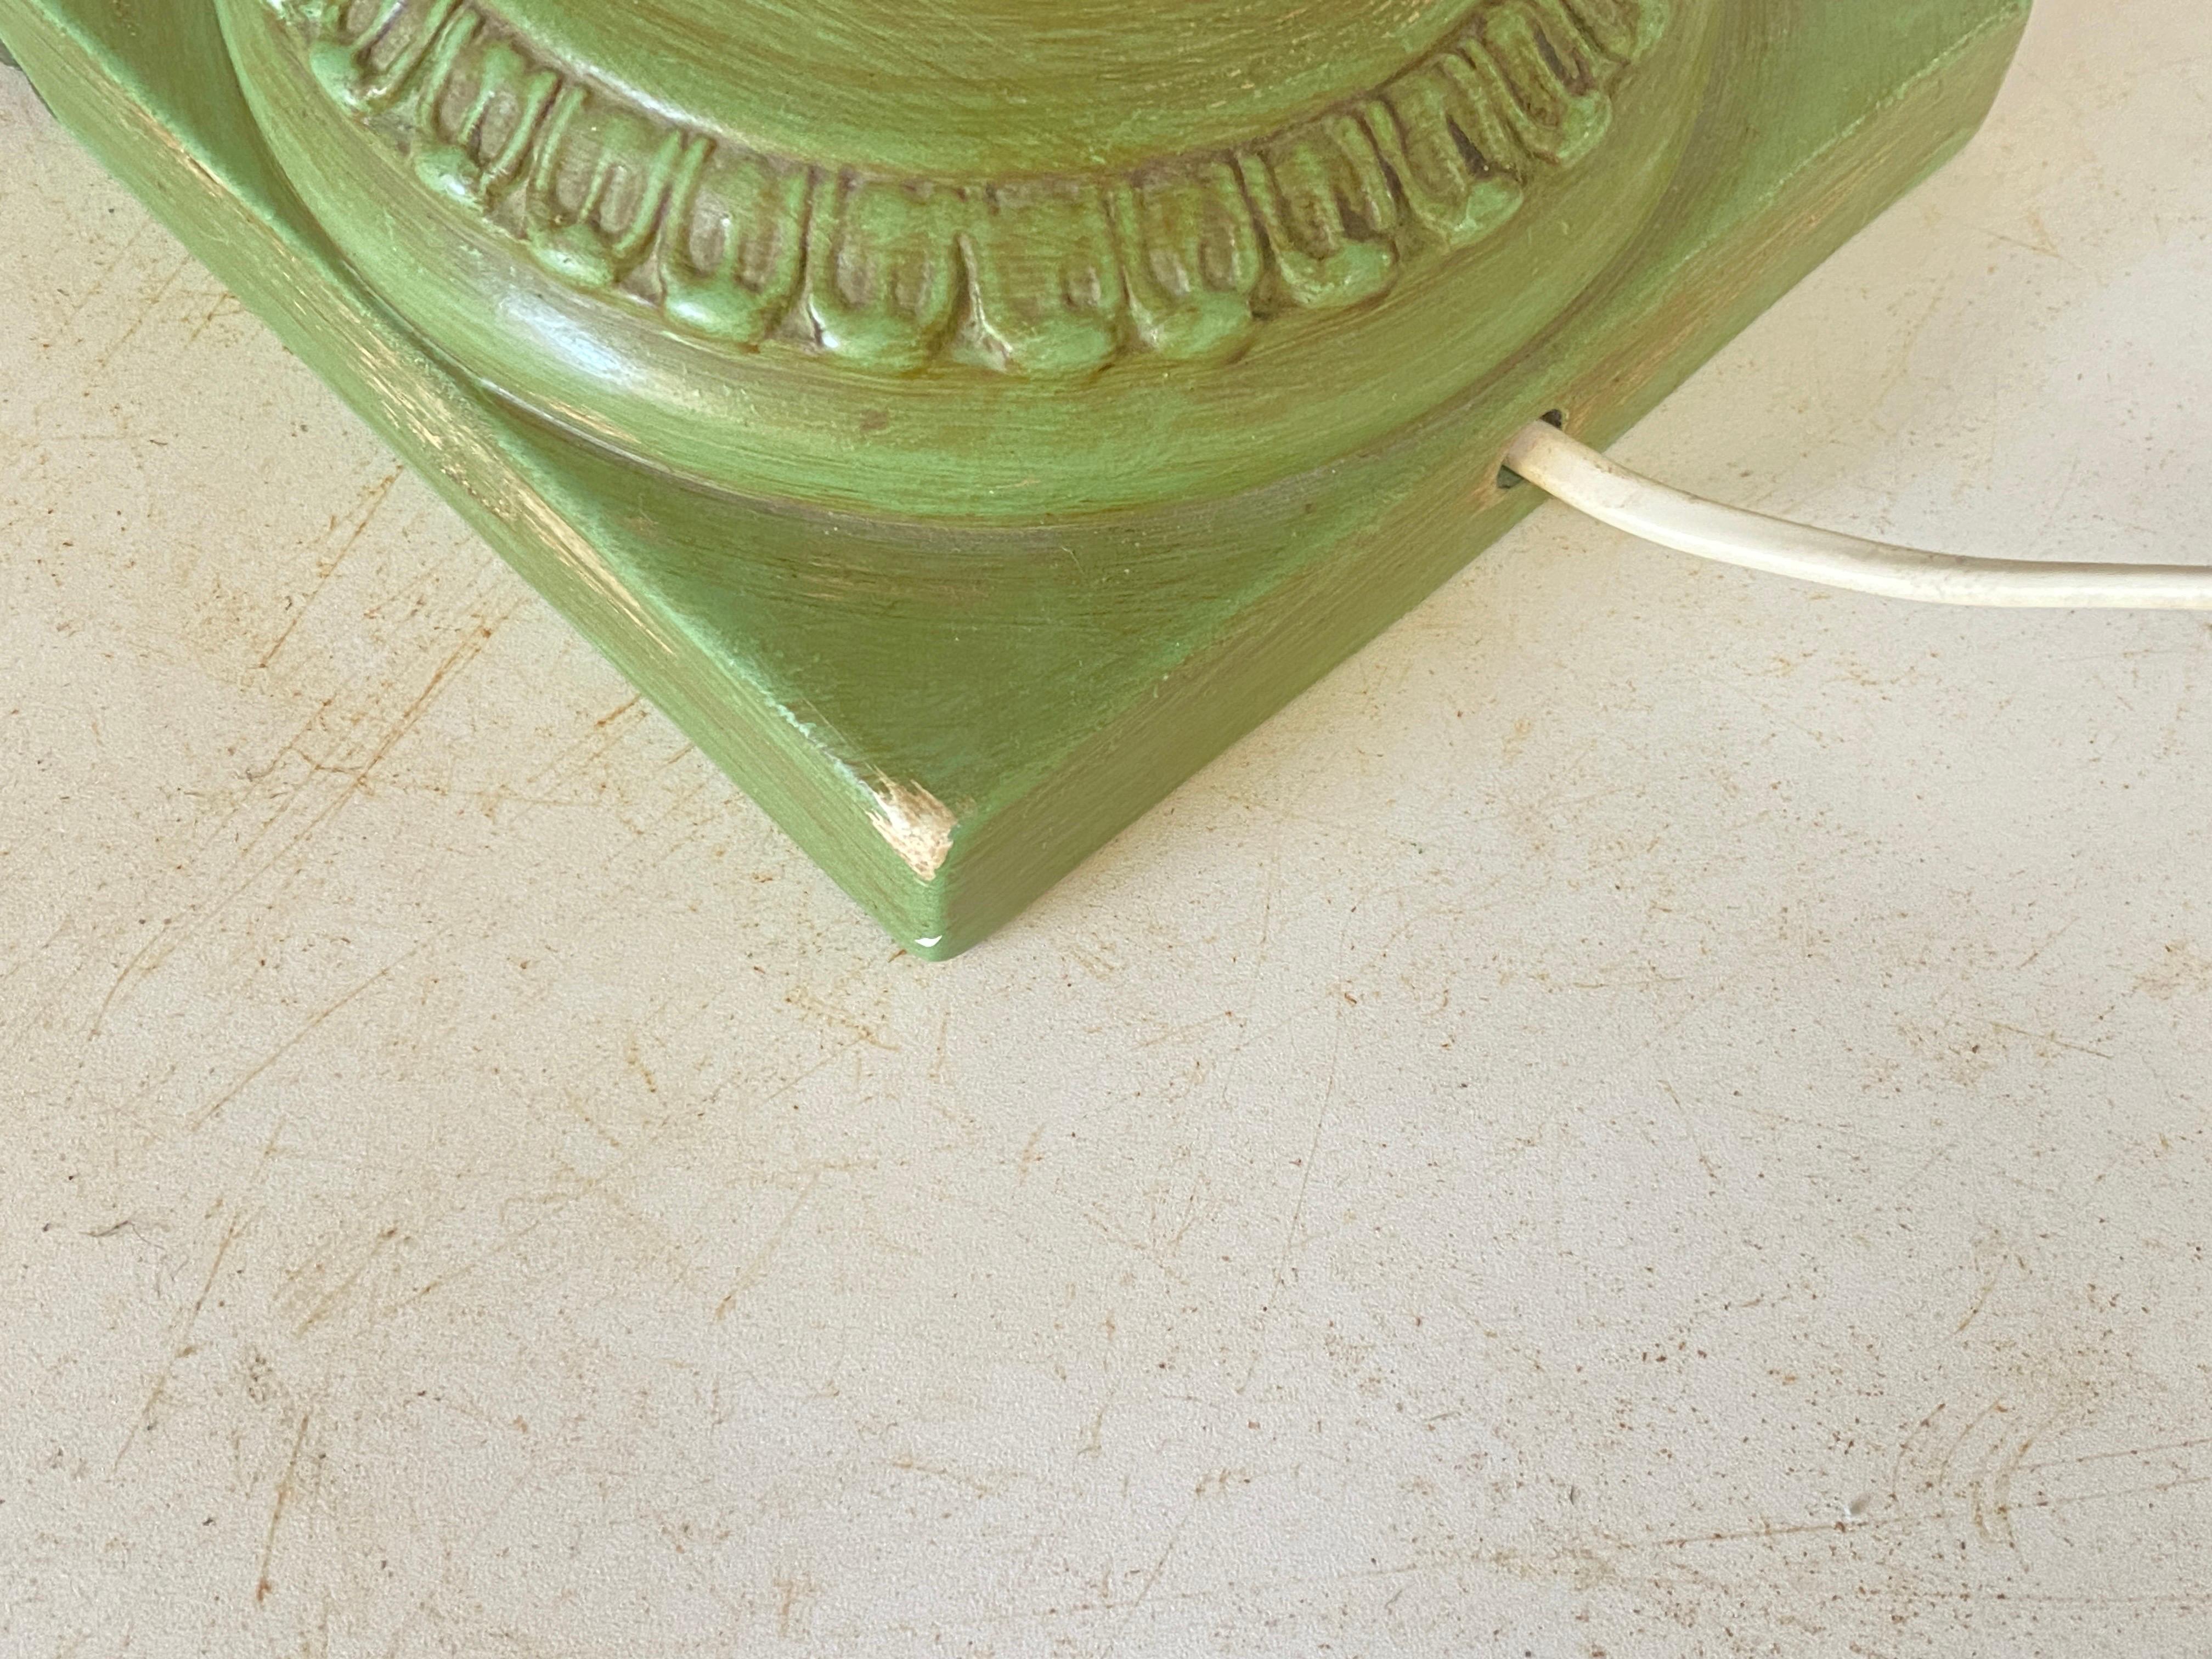 Table Lamp in old patinated Ceramic Green color France 1970 Signed Lancel Paris In Good Condition For Sale In Auribeau sur Siagne, FR